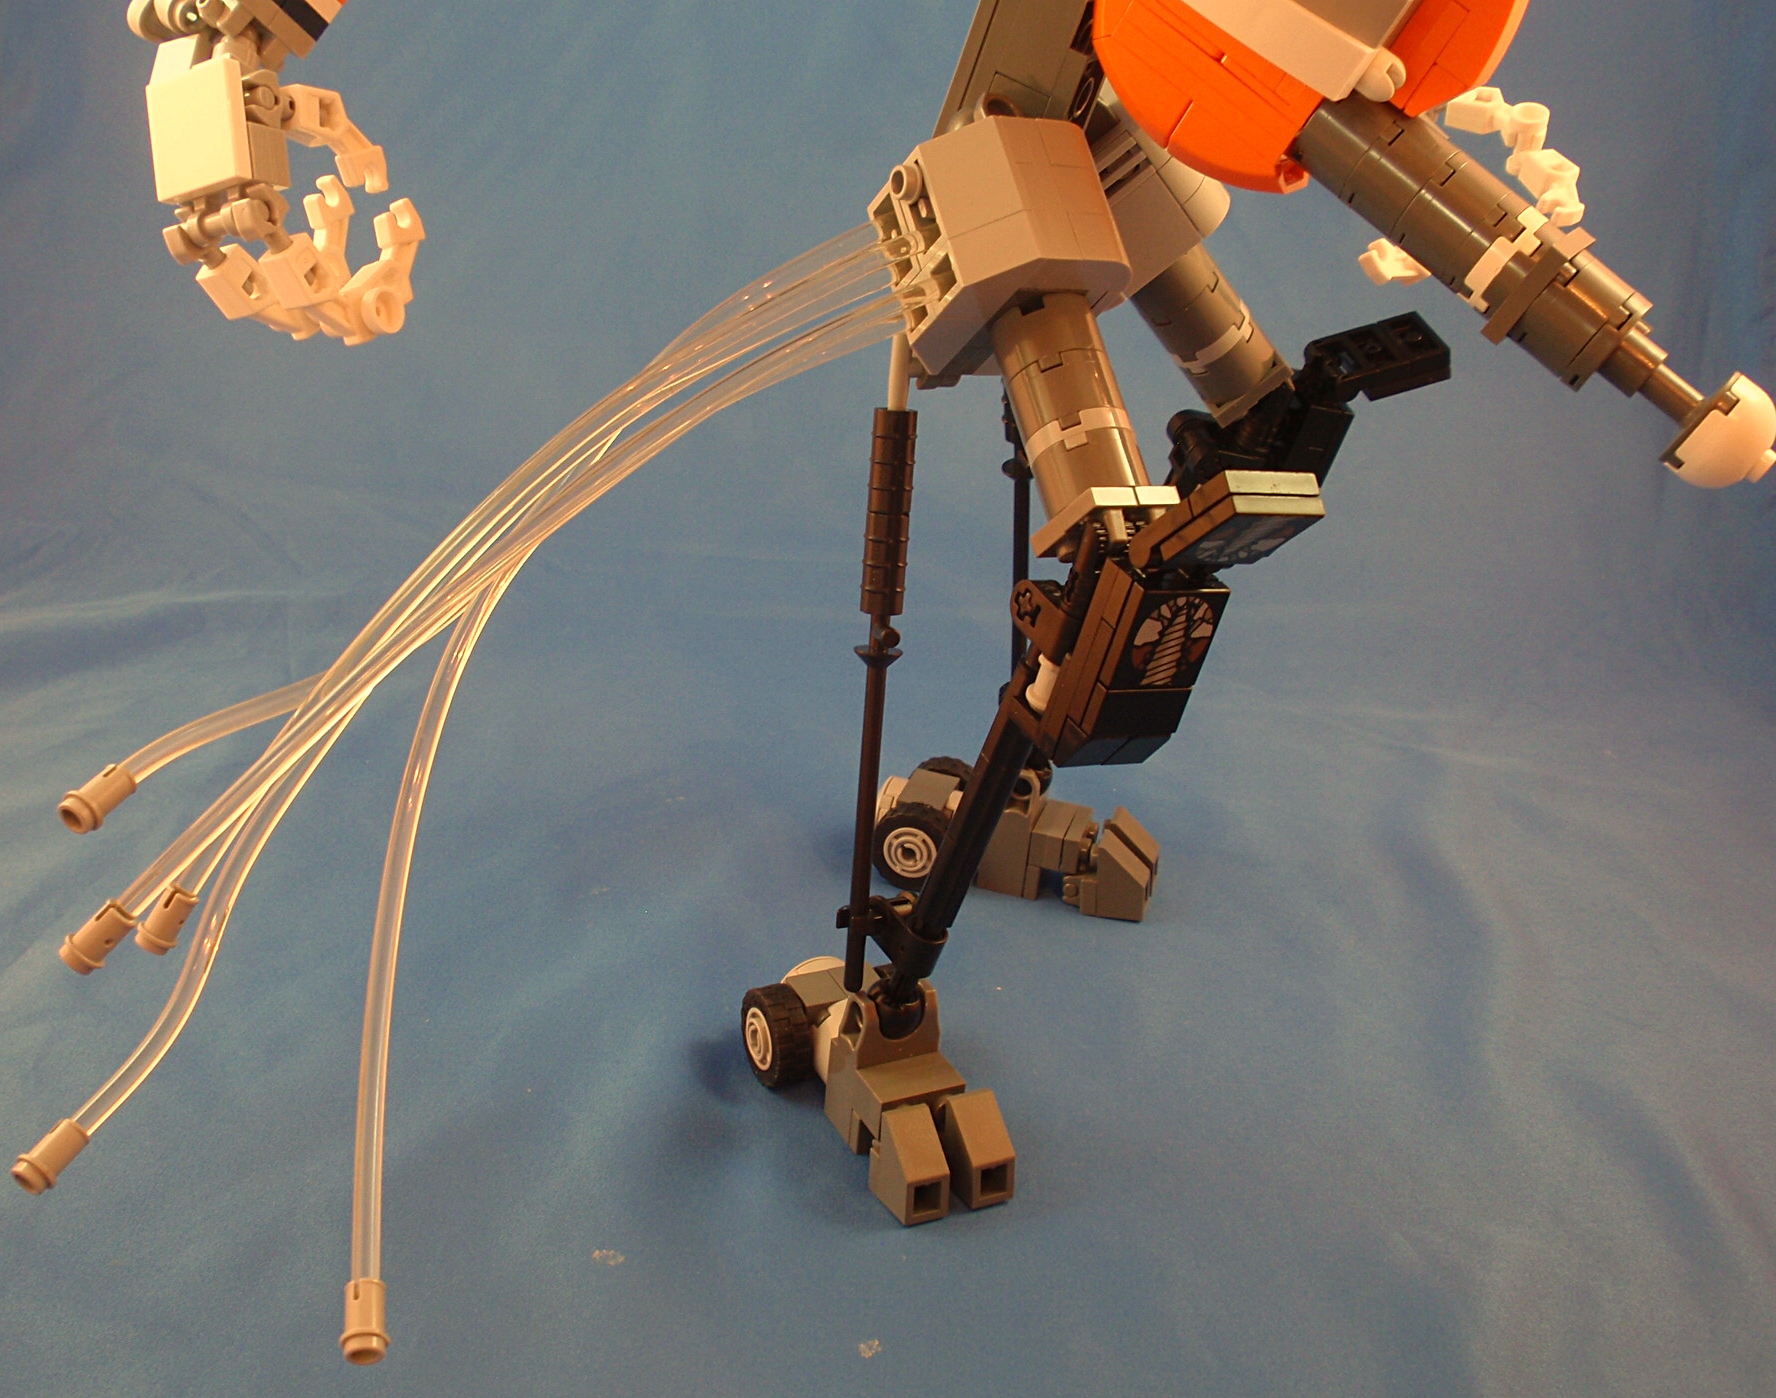 a lego robot with its arms out and legs apart